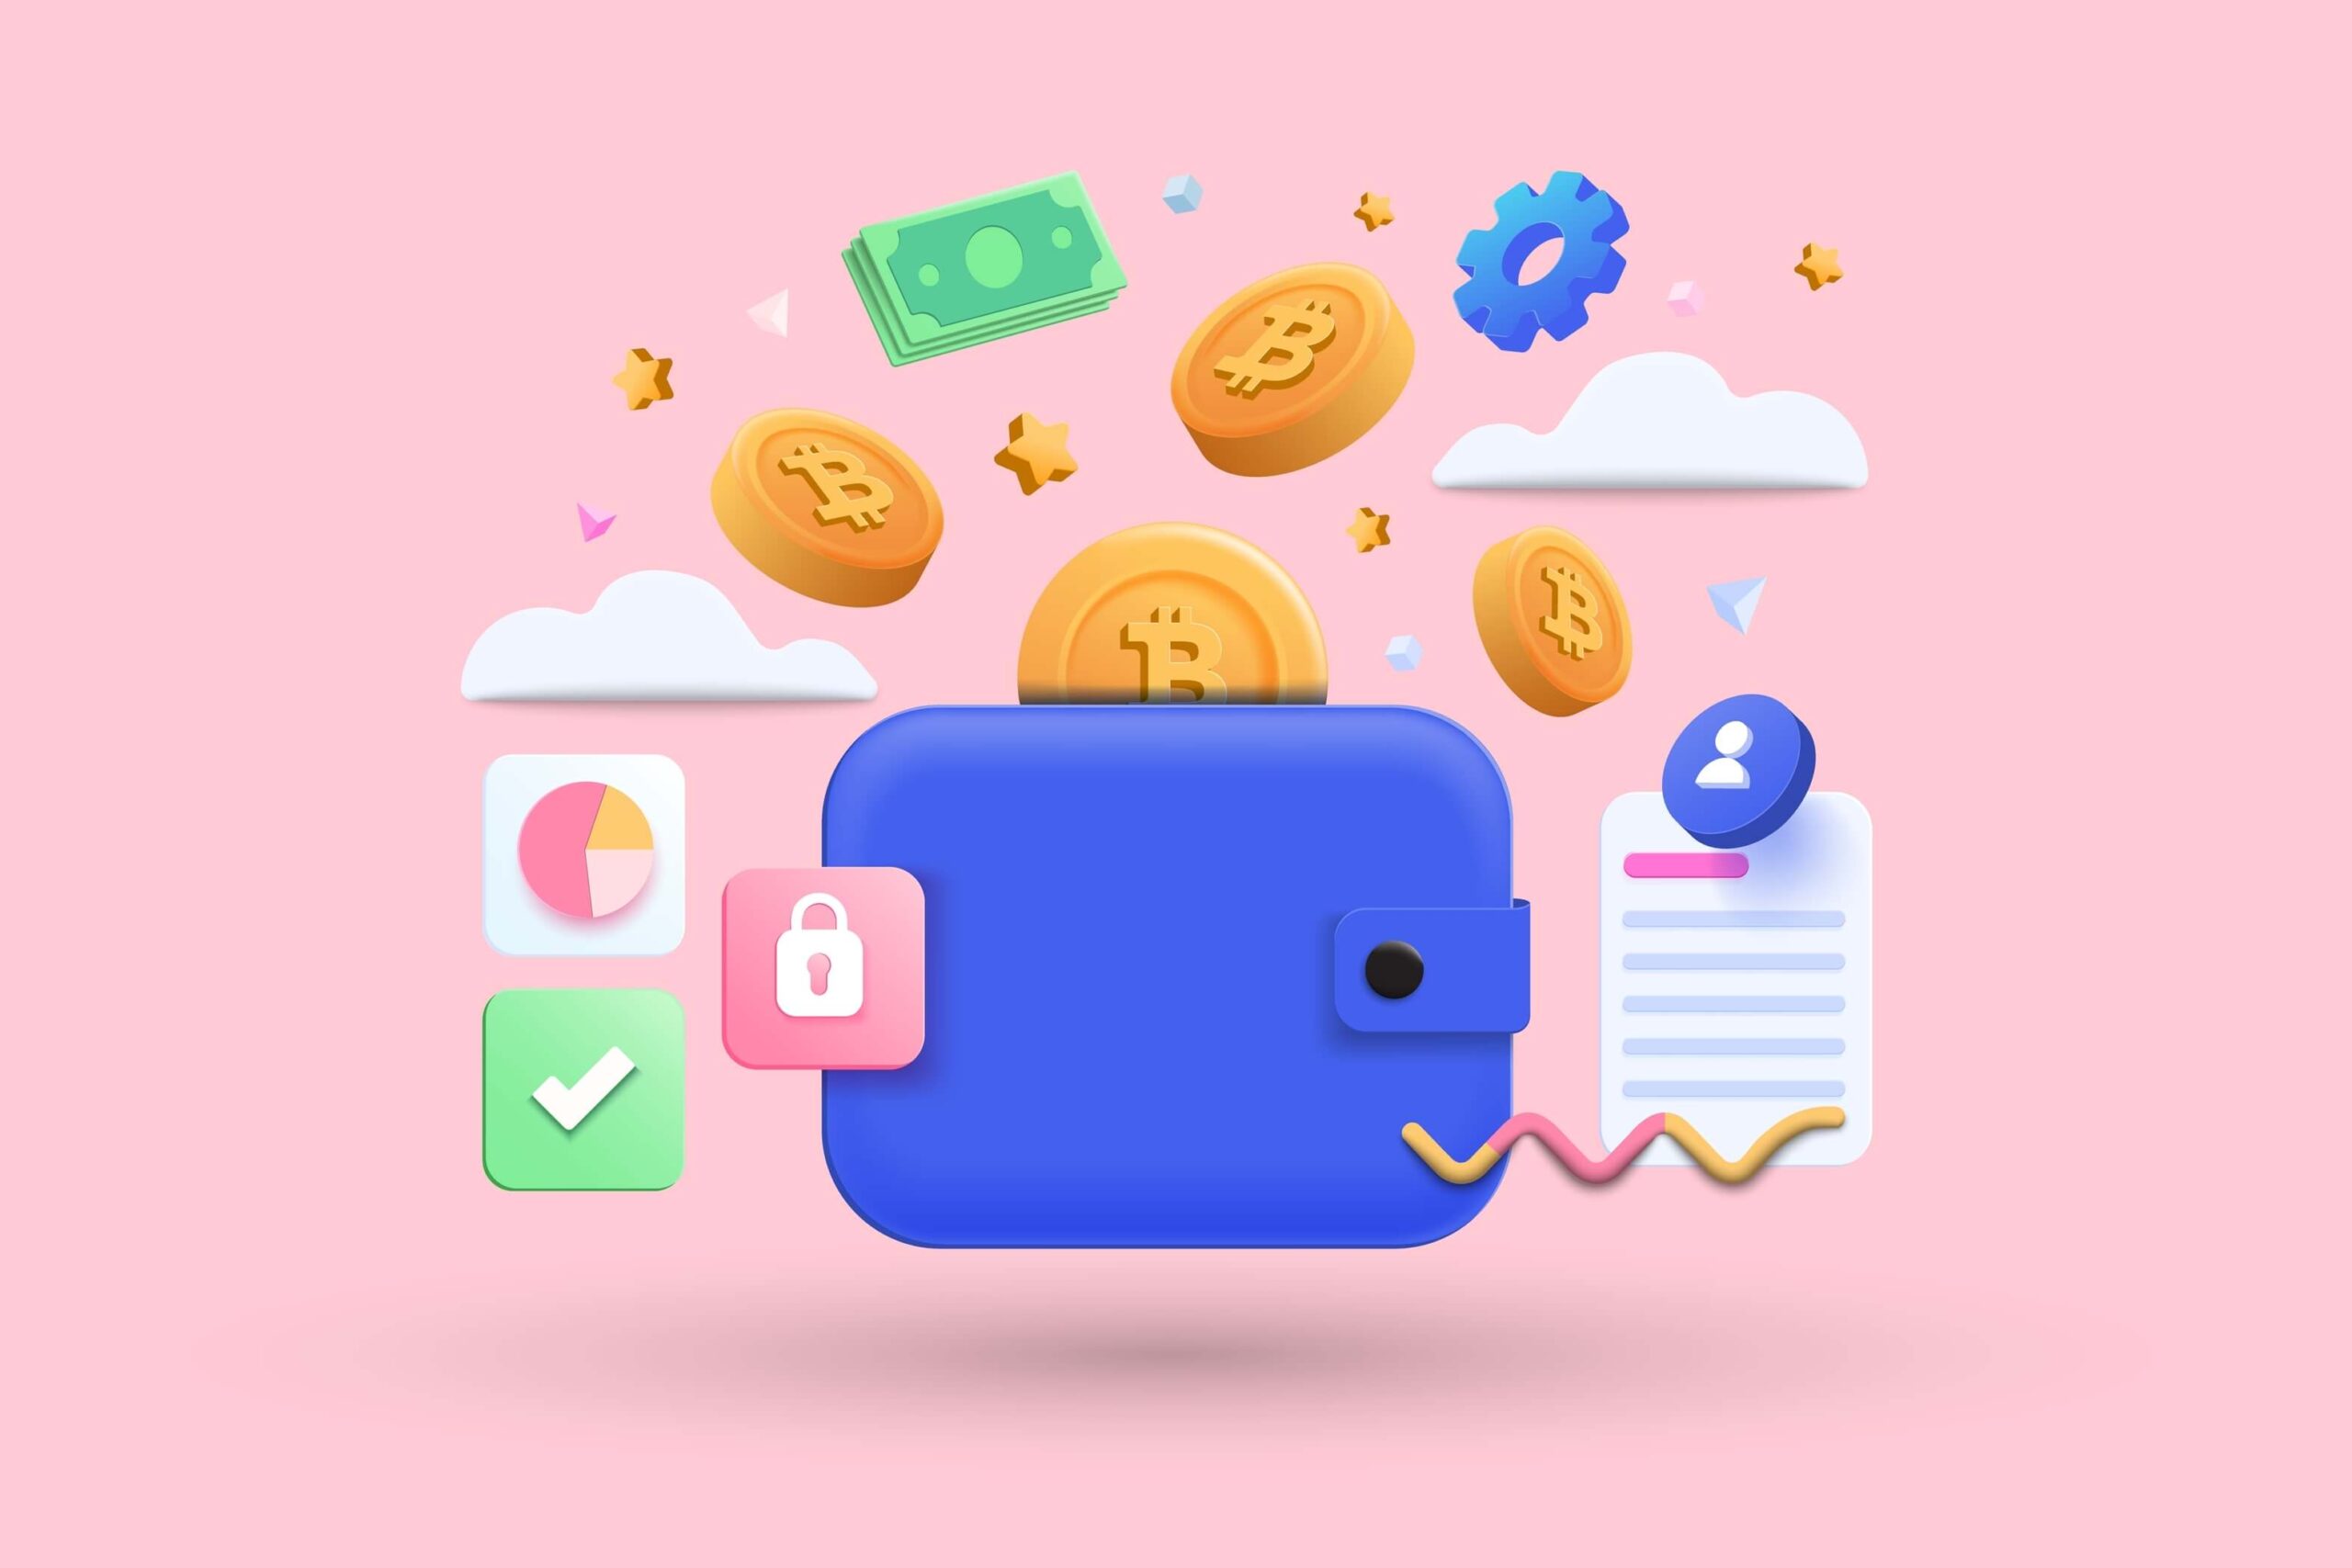 Illustration of a blue crypto bitcoin wallet on pink background.